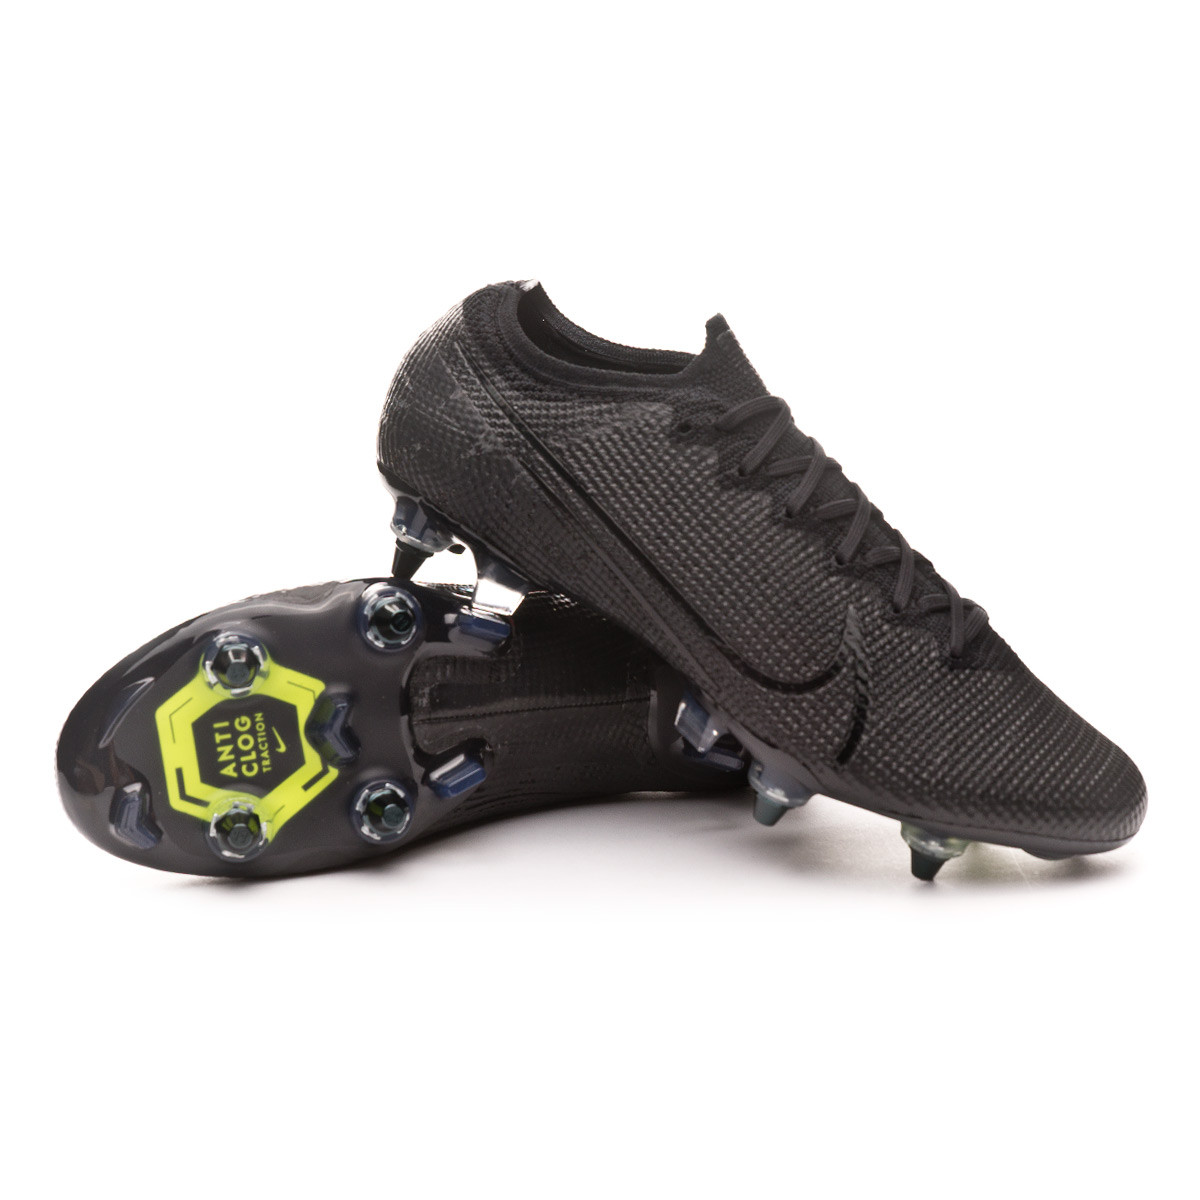 Nike mercurial vapor 13 pro. Find the cheapest prices.